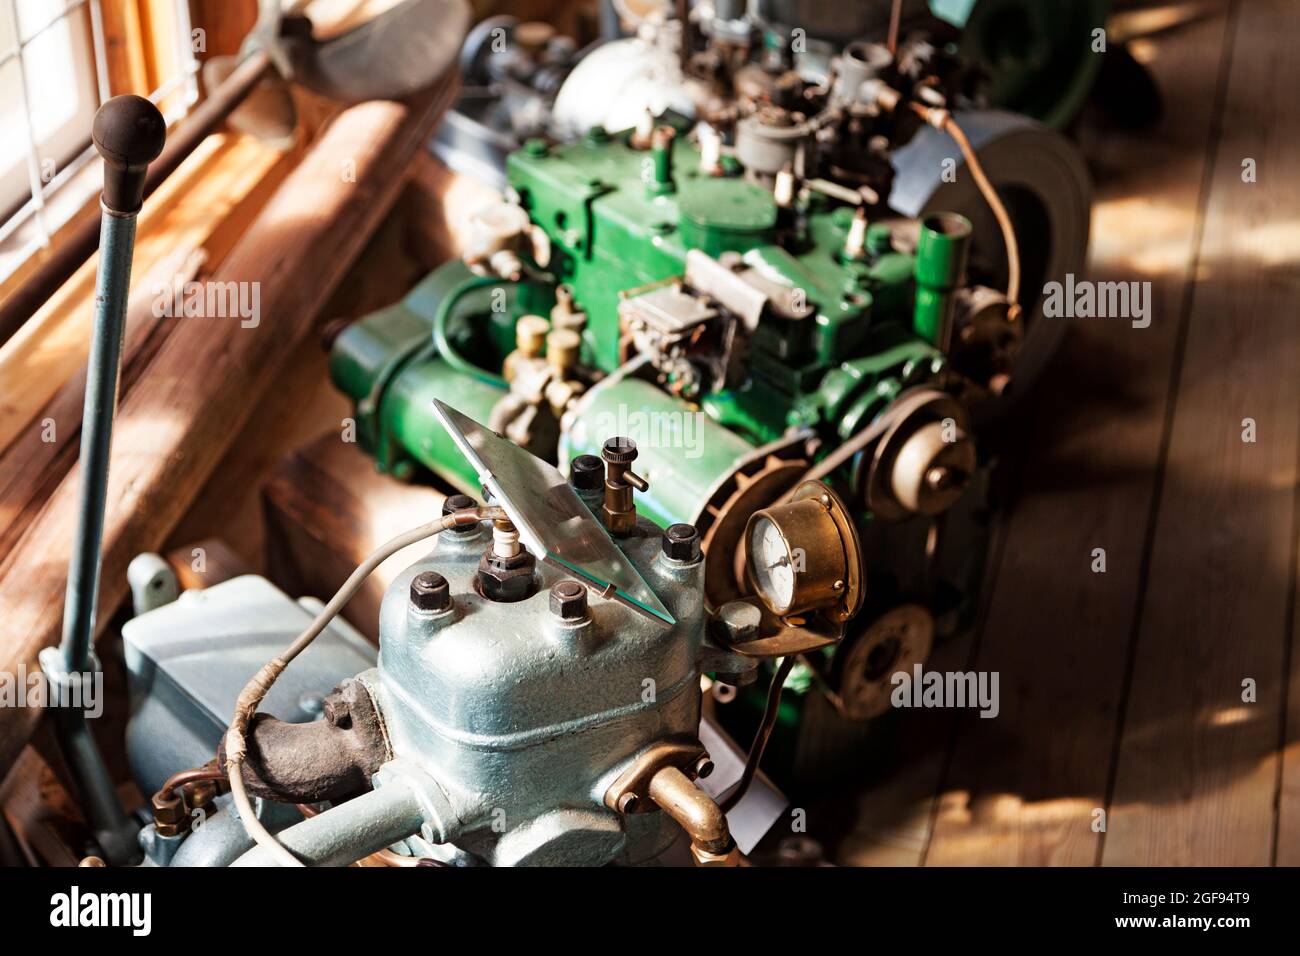 different types of old engines in a row by the window Stock Photo